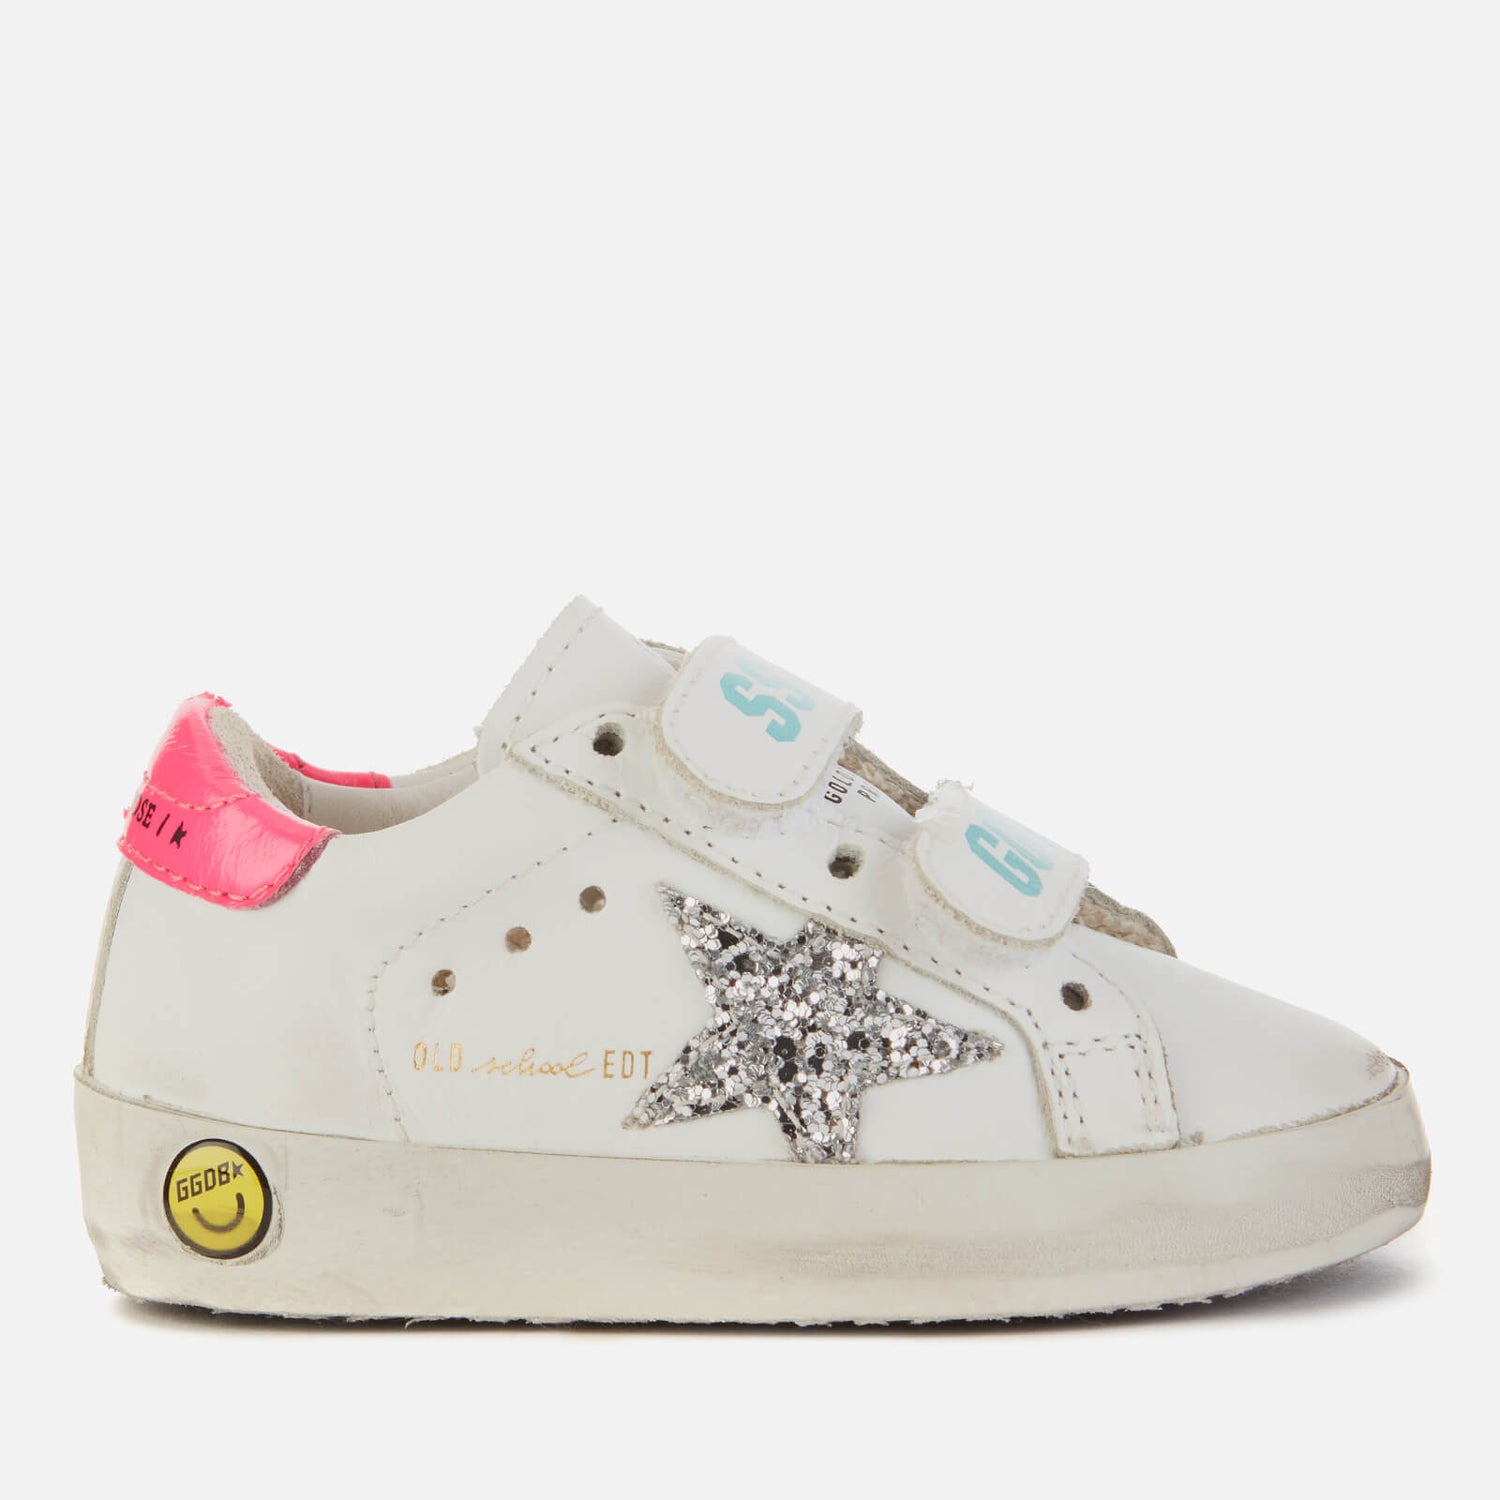 Golden Goose Toddlers' Old School Trainers - White/Silver/Fuchsia - UK 4 Infant